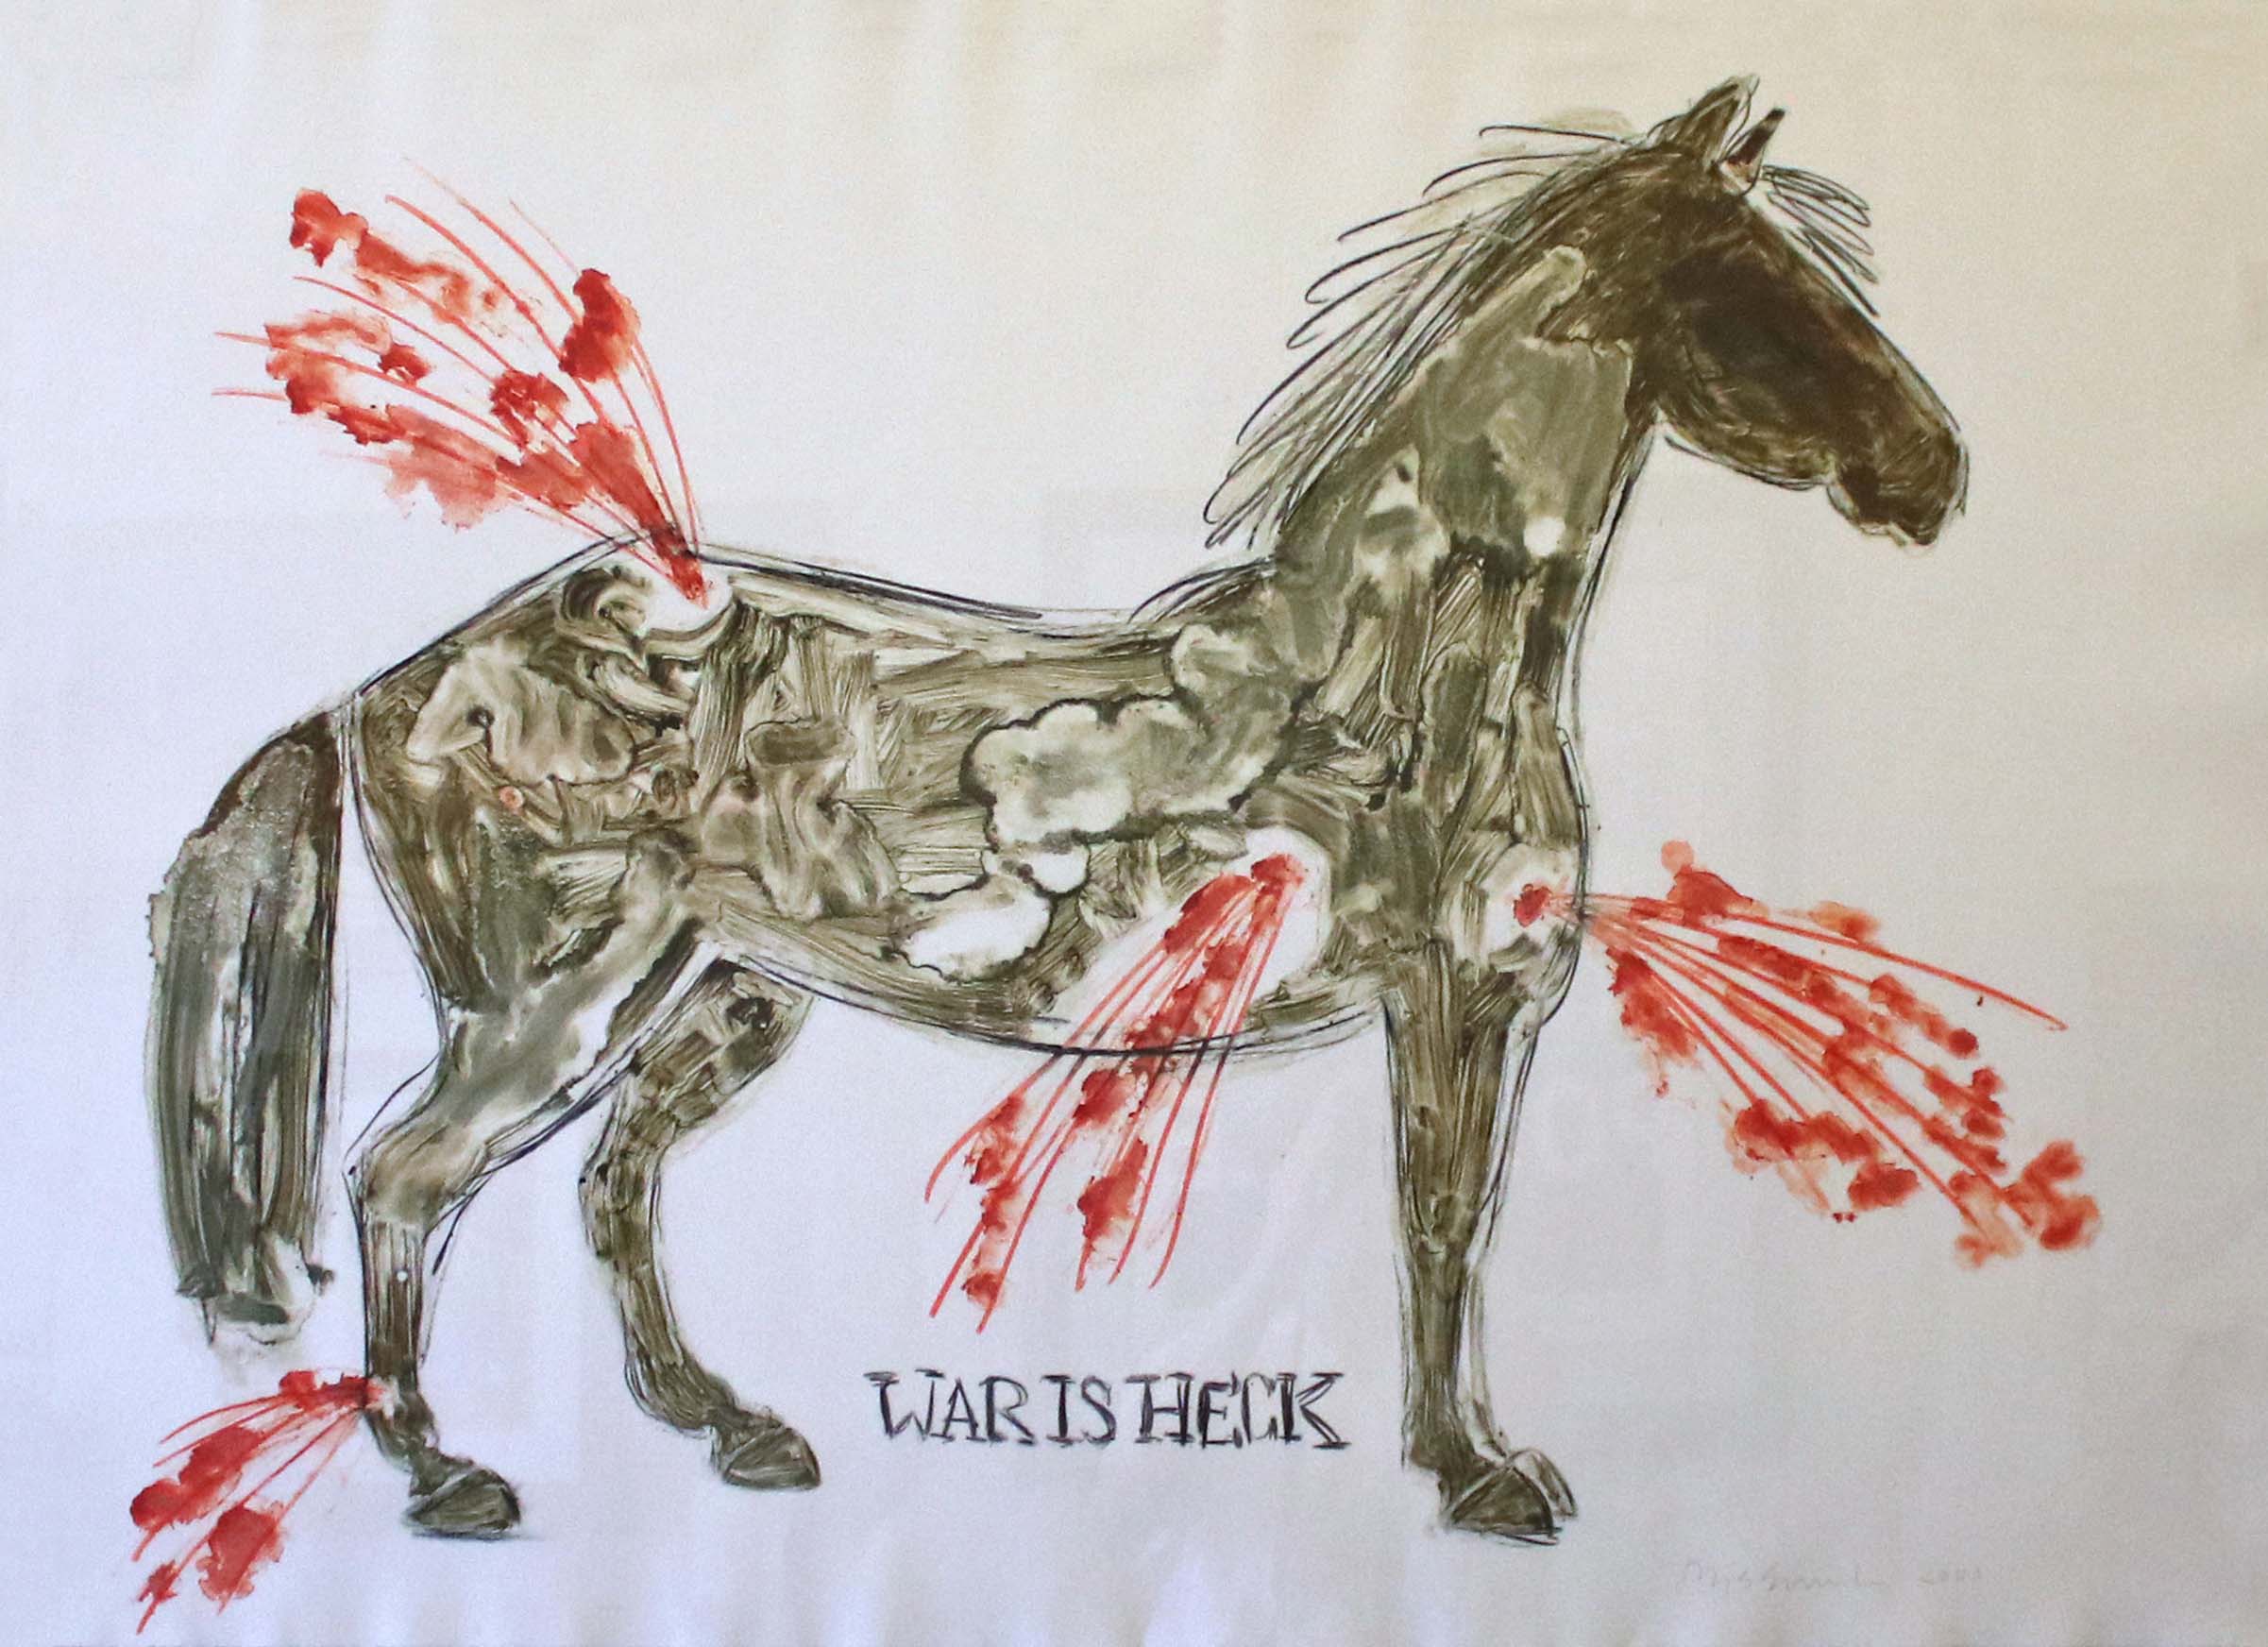 a brushy painting of the outline of a horse with what looks like blood spraying from wounds and "war is heck" written on it.